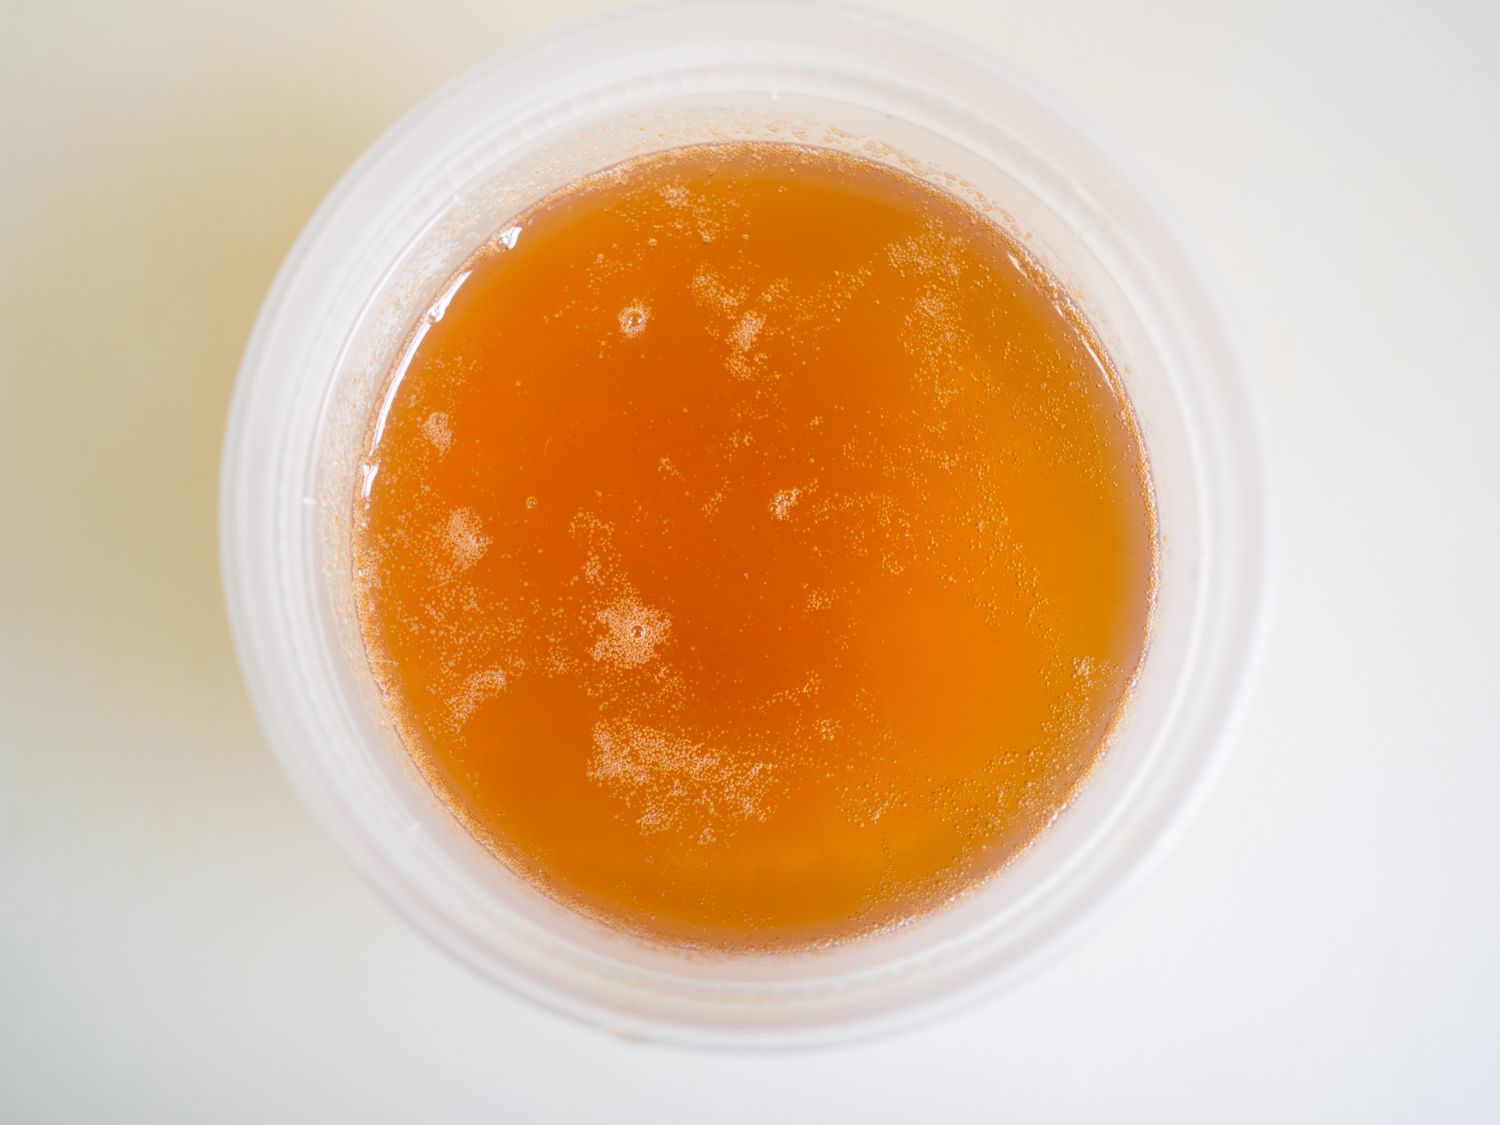 Overhead view of a deli container filled with dark, golden schmaltz.